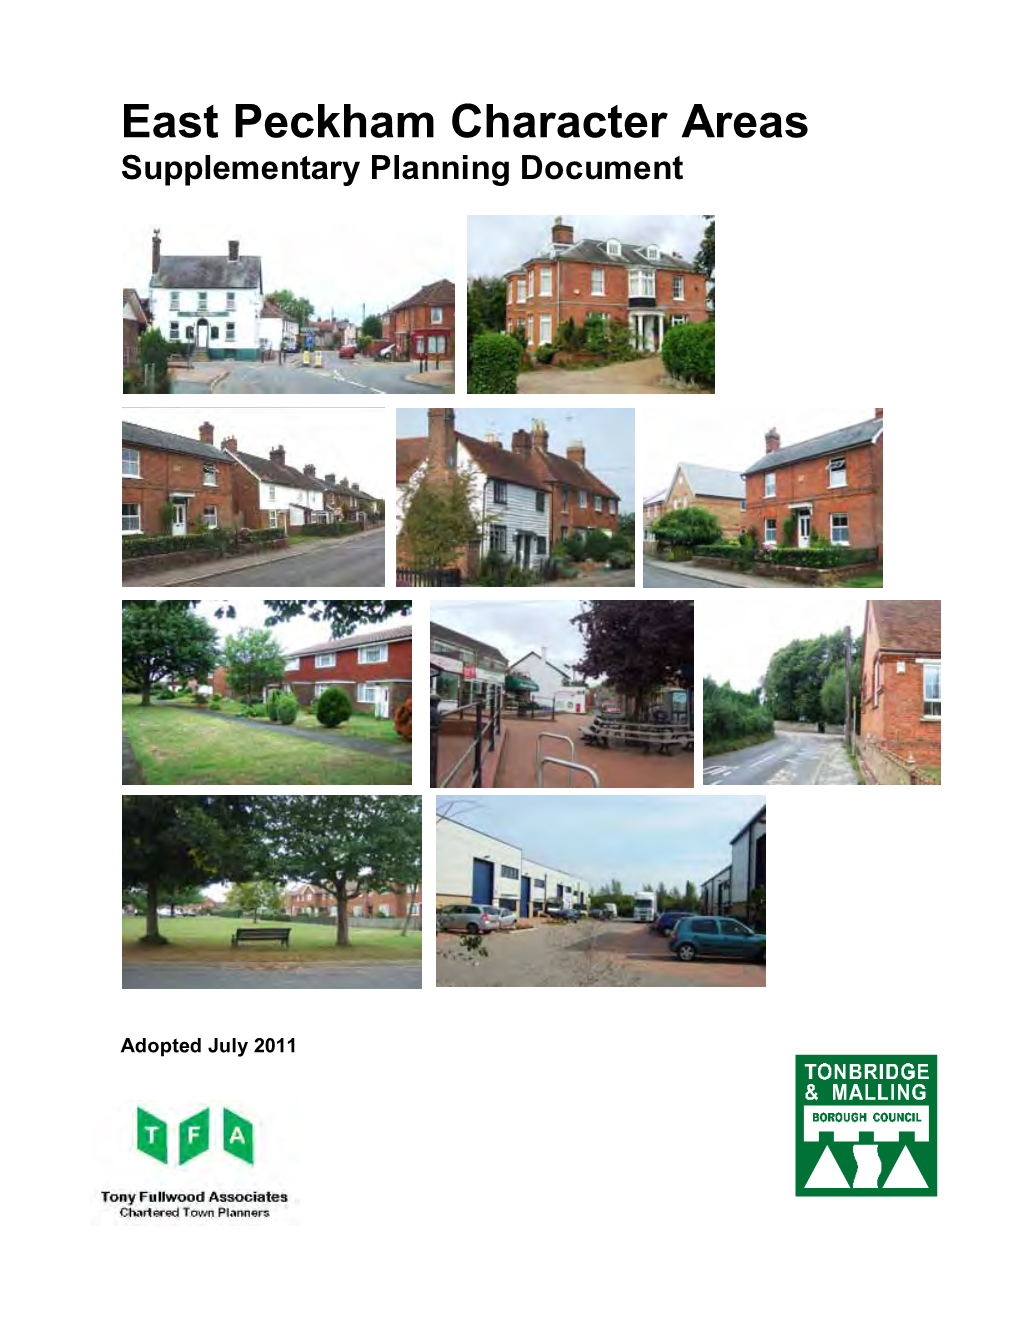 East Peckham Character Areas Supplementary Planning Document